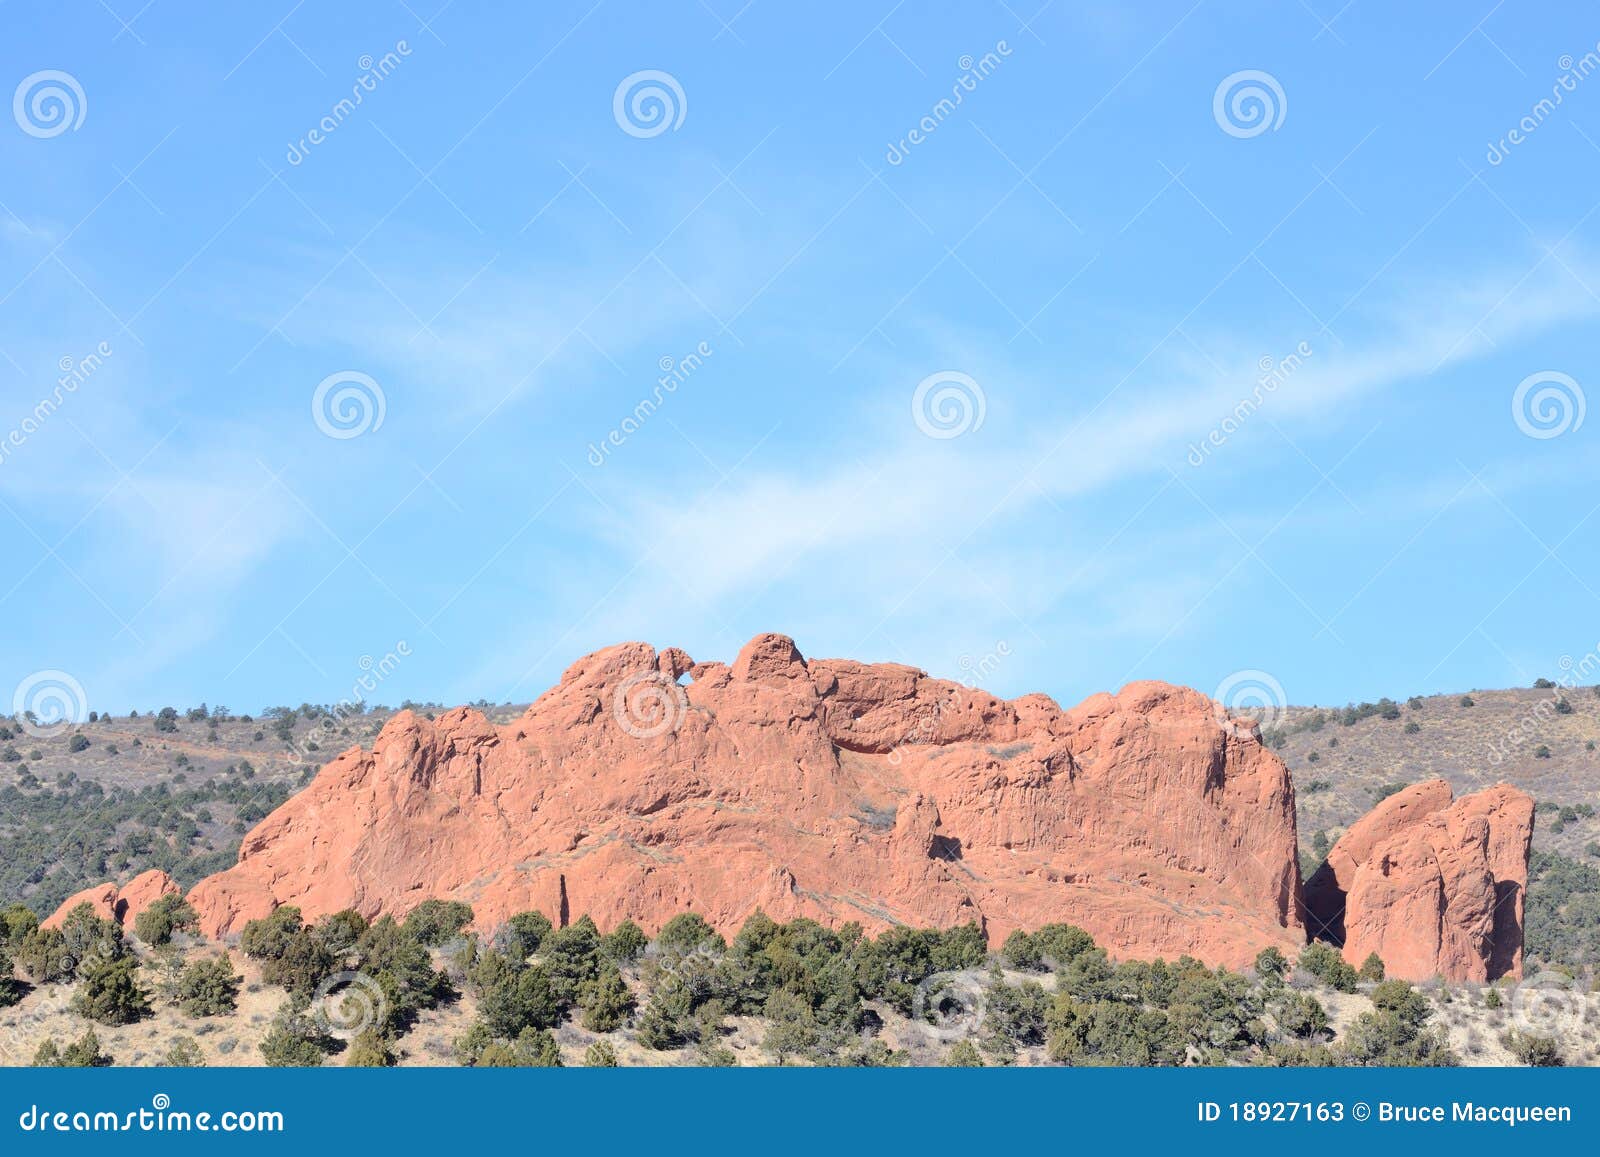 Garden of the Gods Kissing Camels Stock Image - Image of formation ...